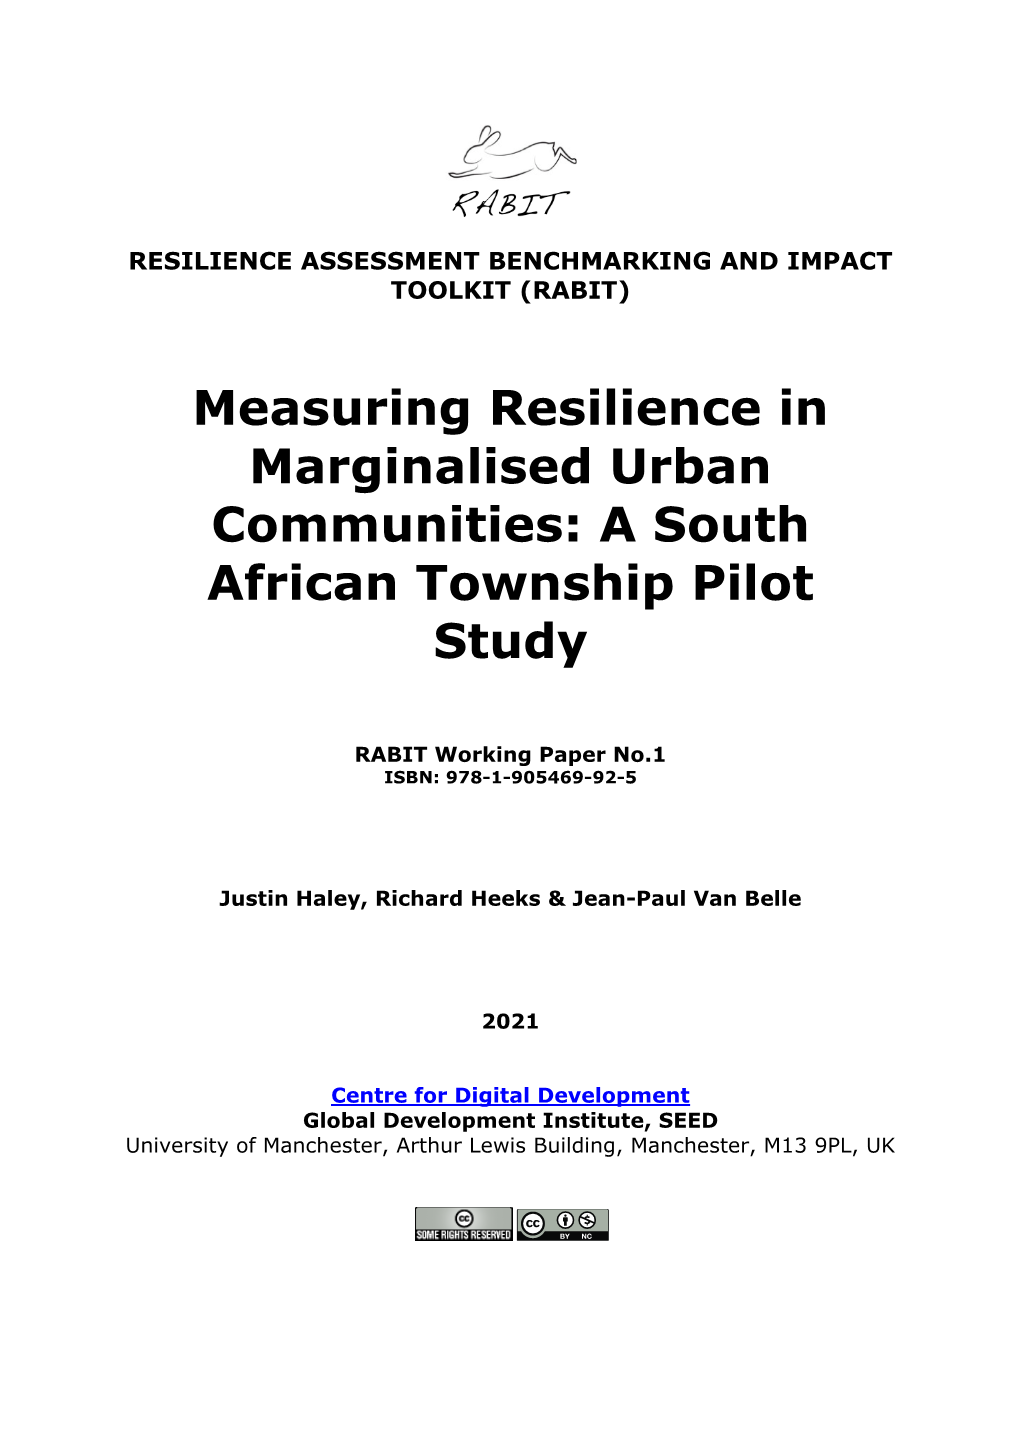 Measuring Resilience in Marginalised Urban Communities: a South African Township Pilot Study